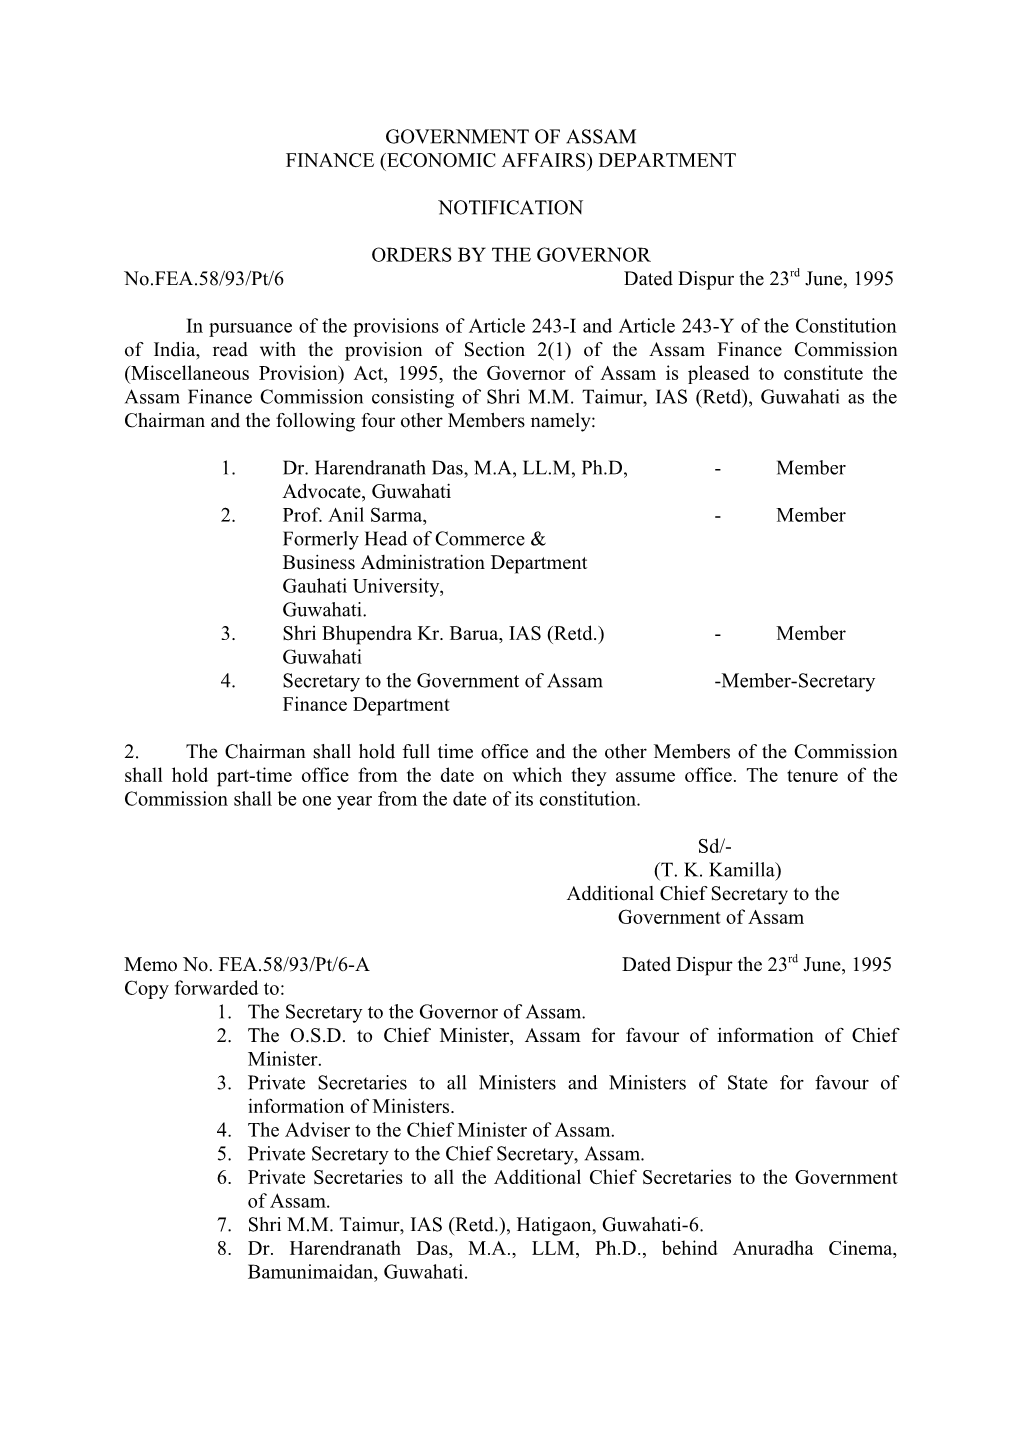 Constituted by the Governor of Assam, on 23Rd June, 1995